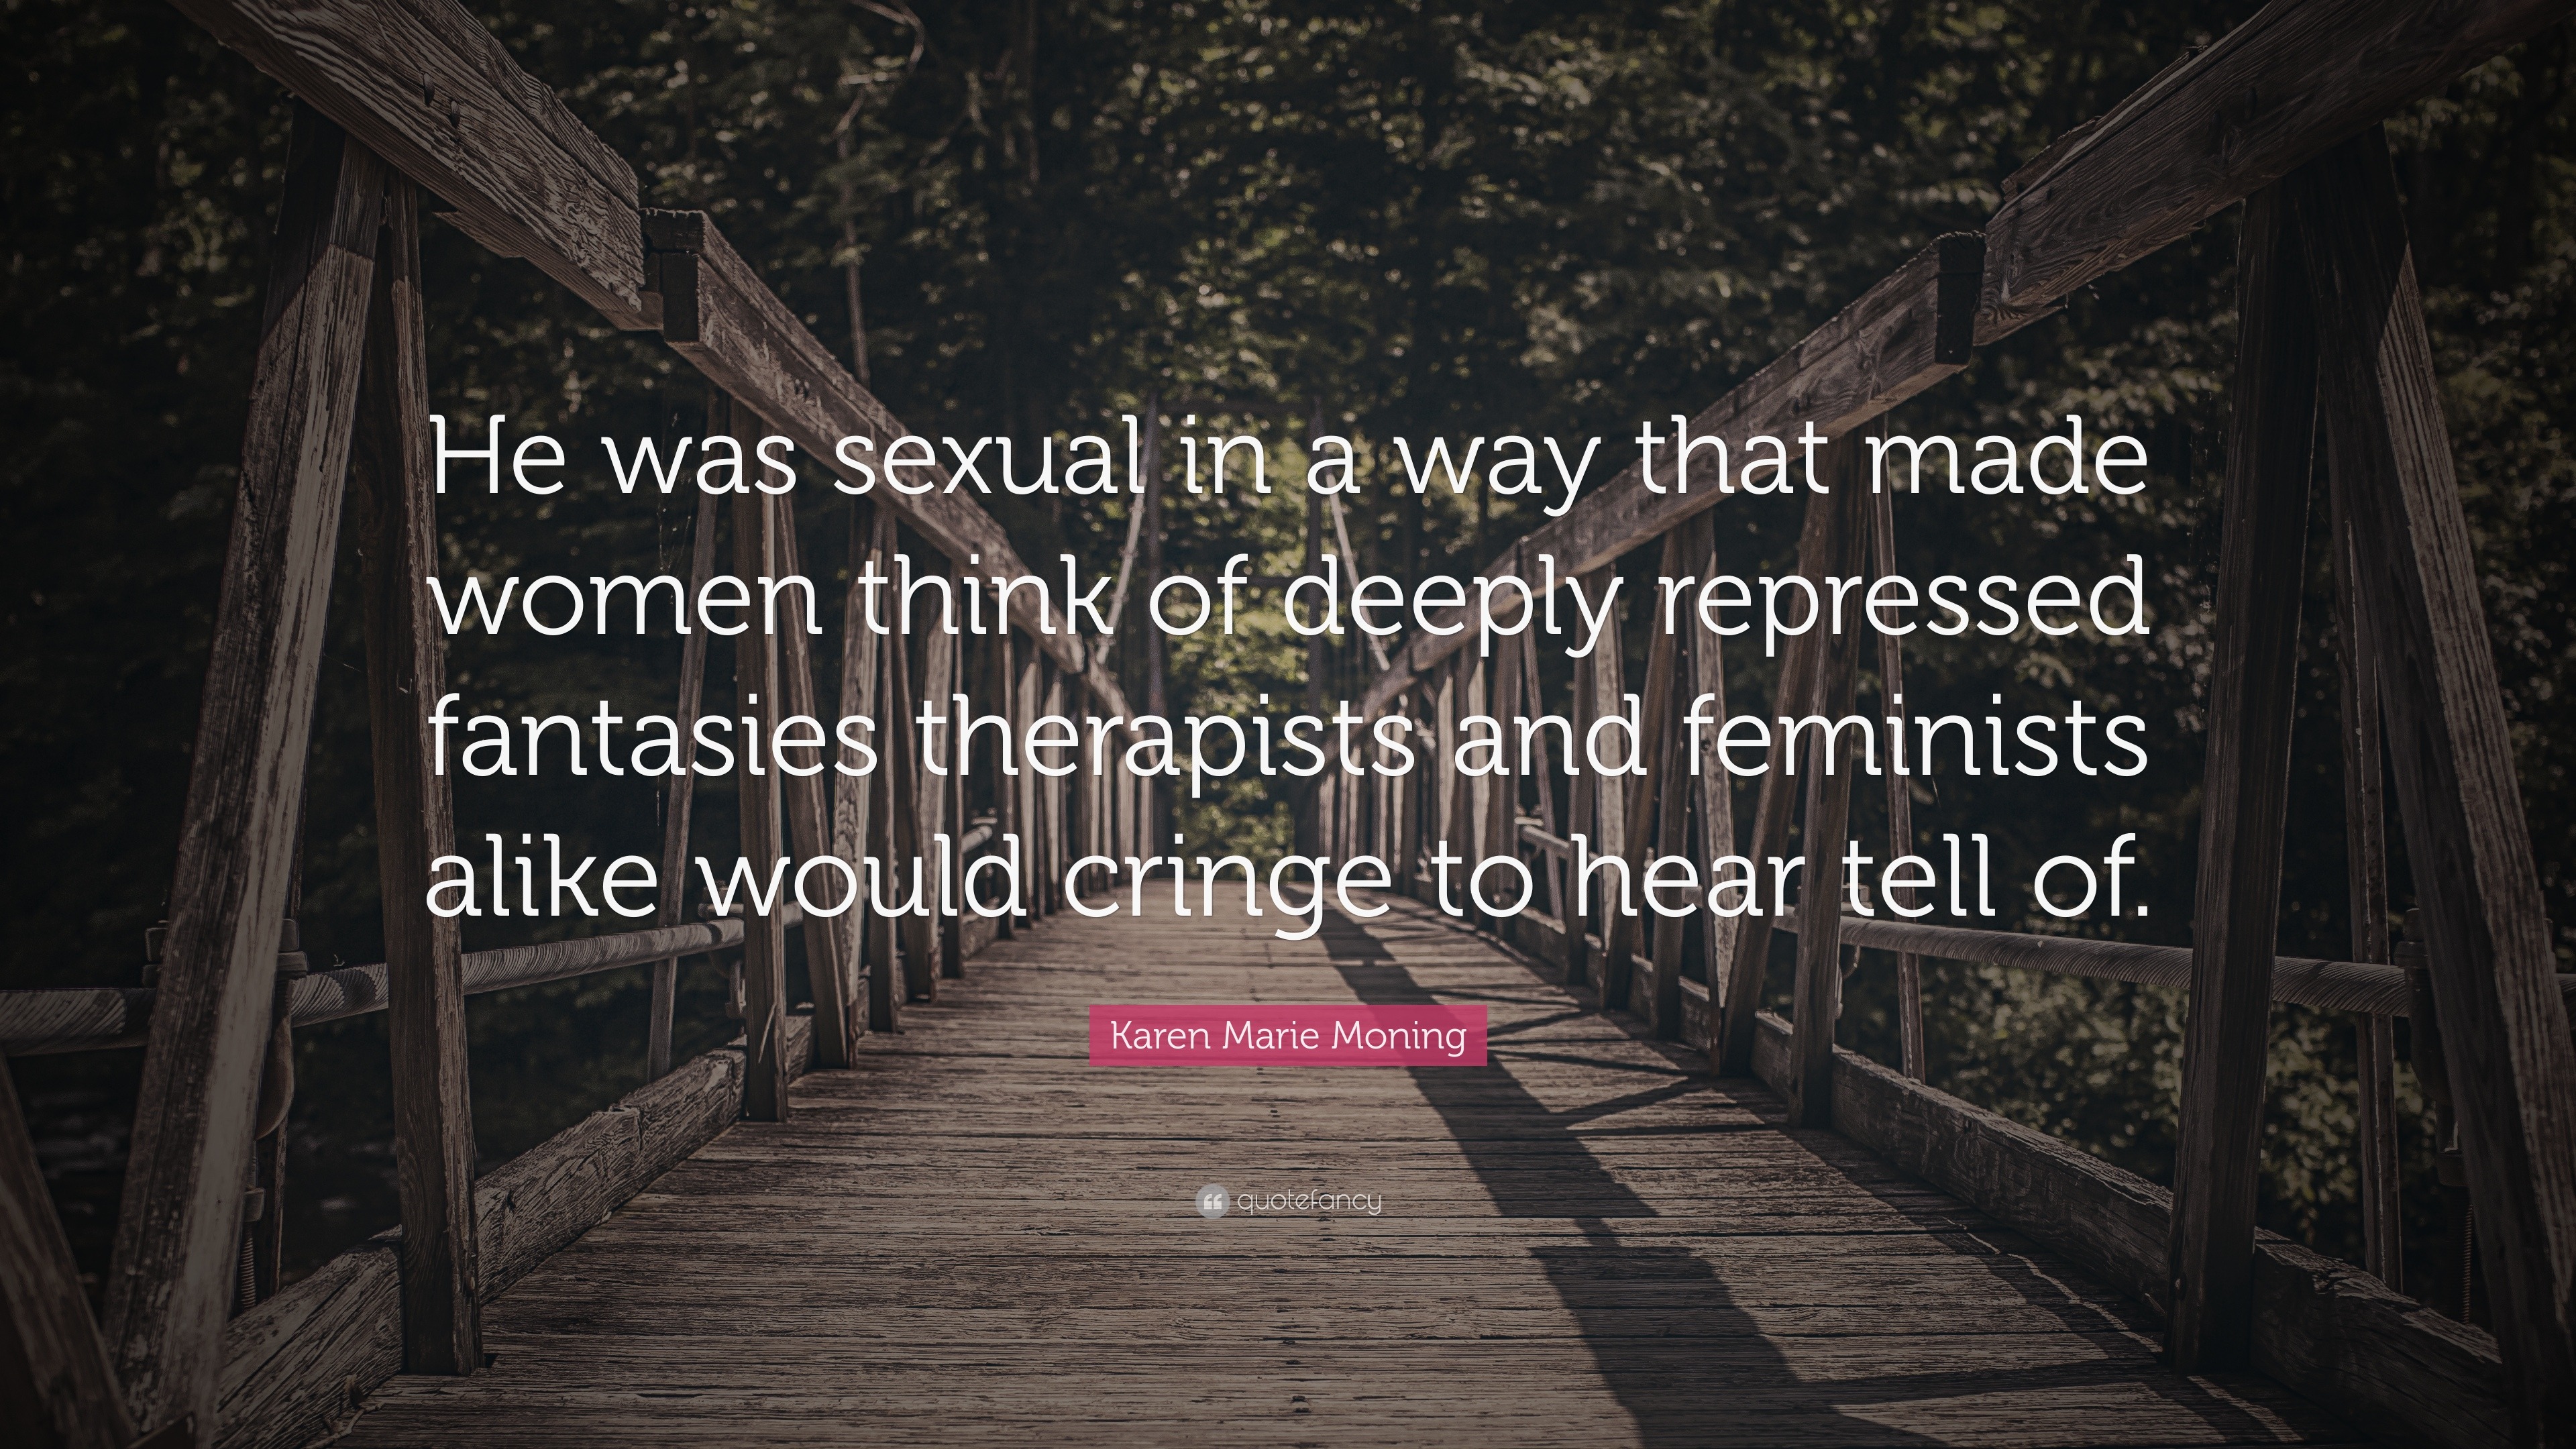 Karen Marie Moning Quote He Was Sexual In A Way That Made Women Think Of Deeply Repressed Fantasies Therapists And Feminists Alike Would Cringe T